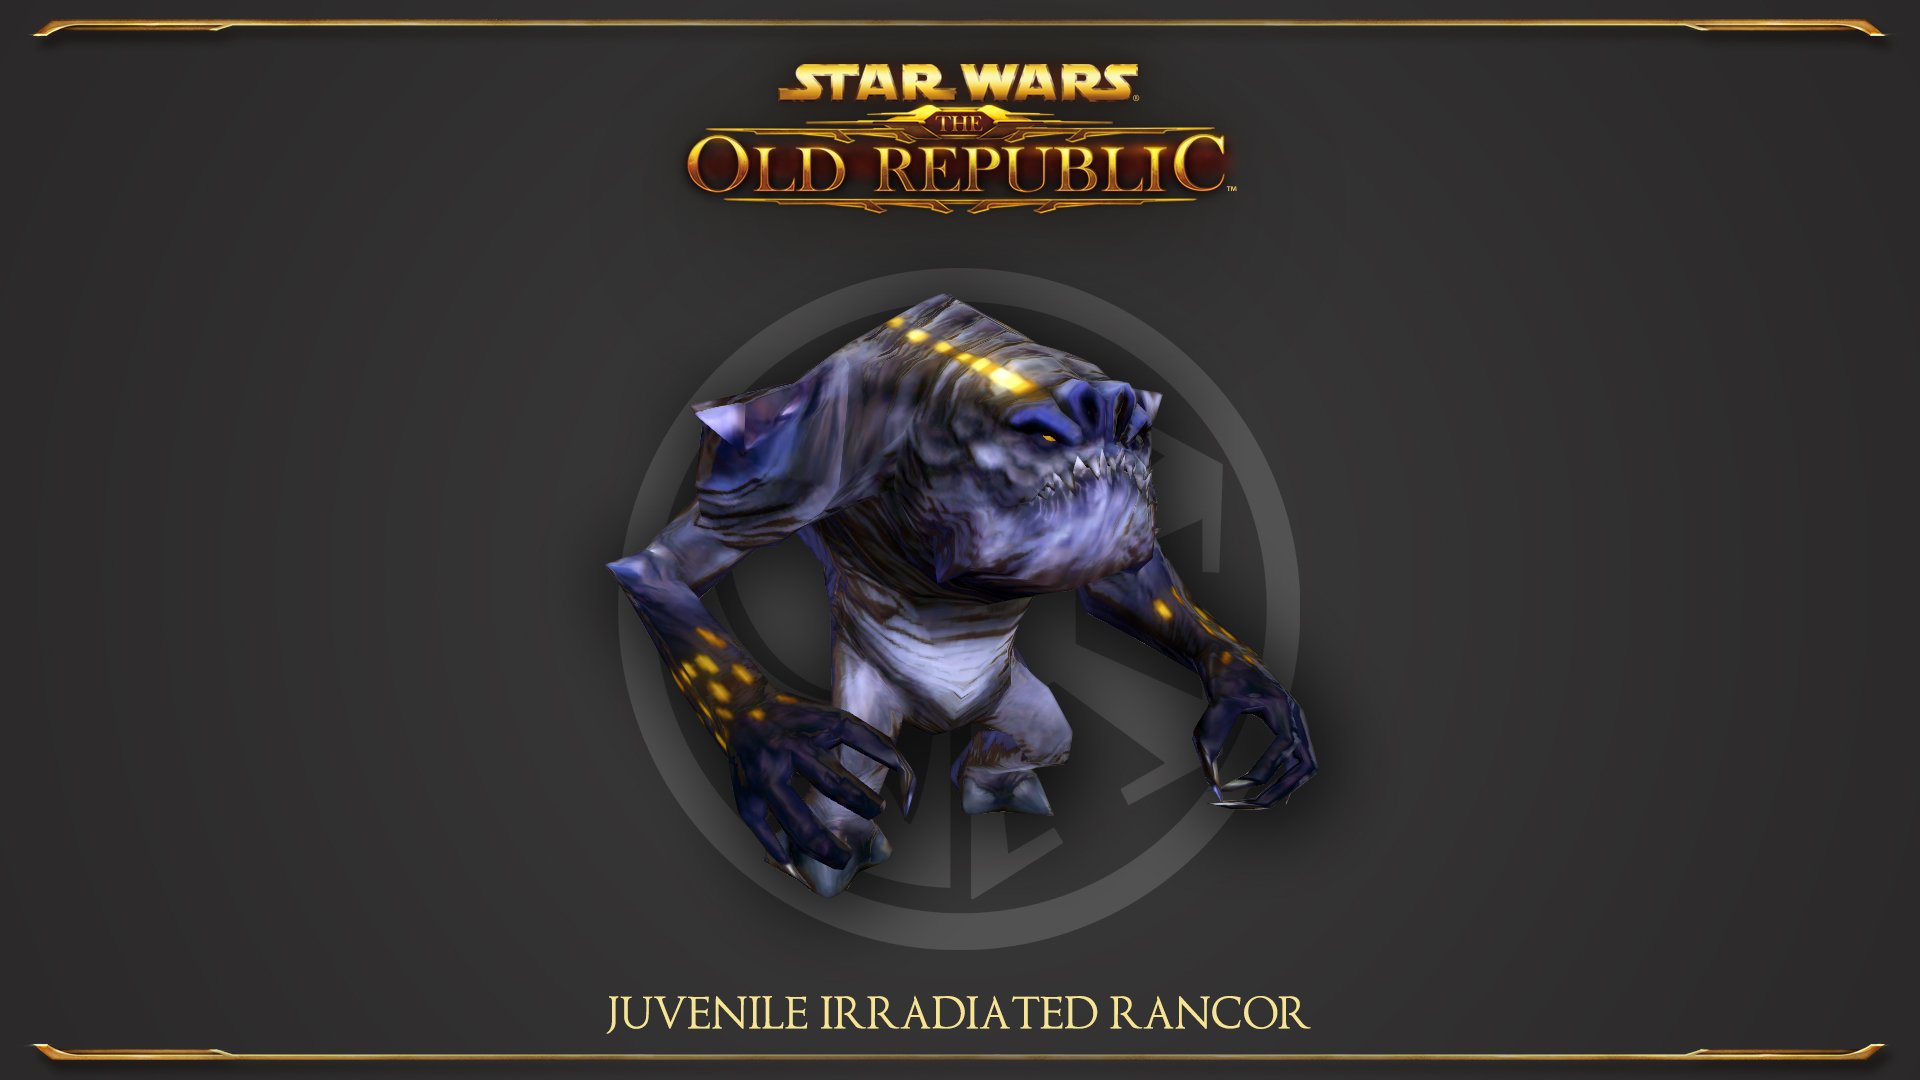 Star Wars: The Old Republic - 14,500 Cartel Coins + Exclusive Item [Online Game Code]